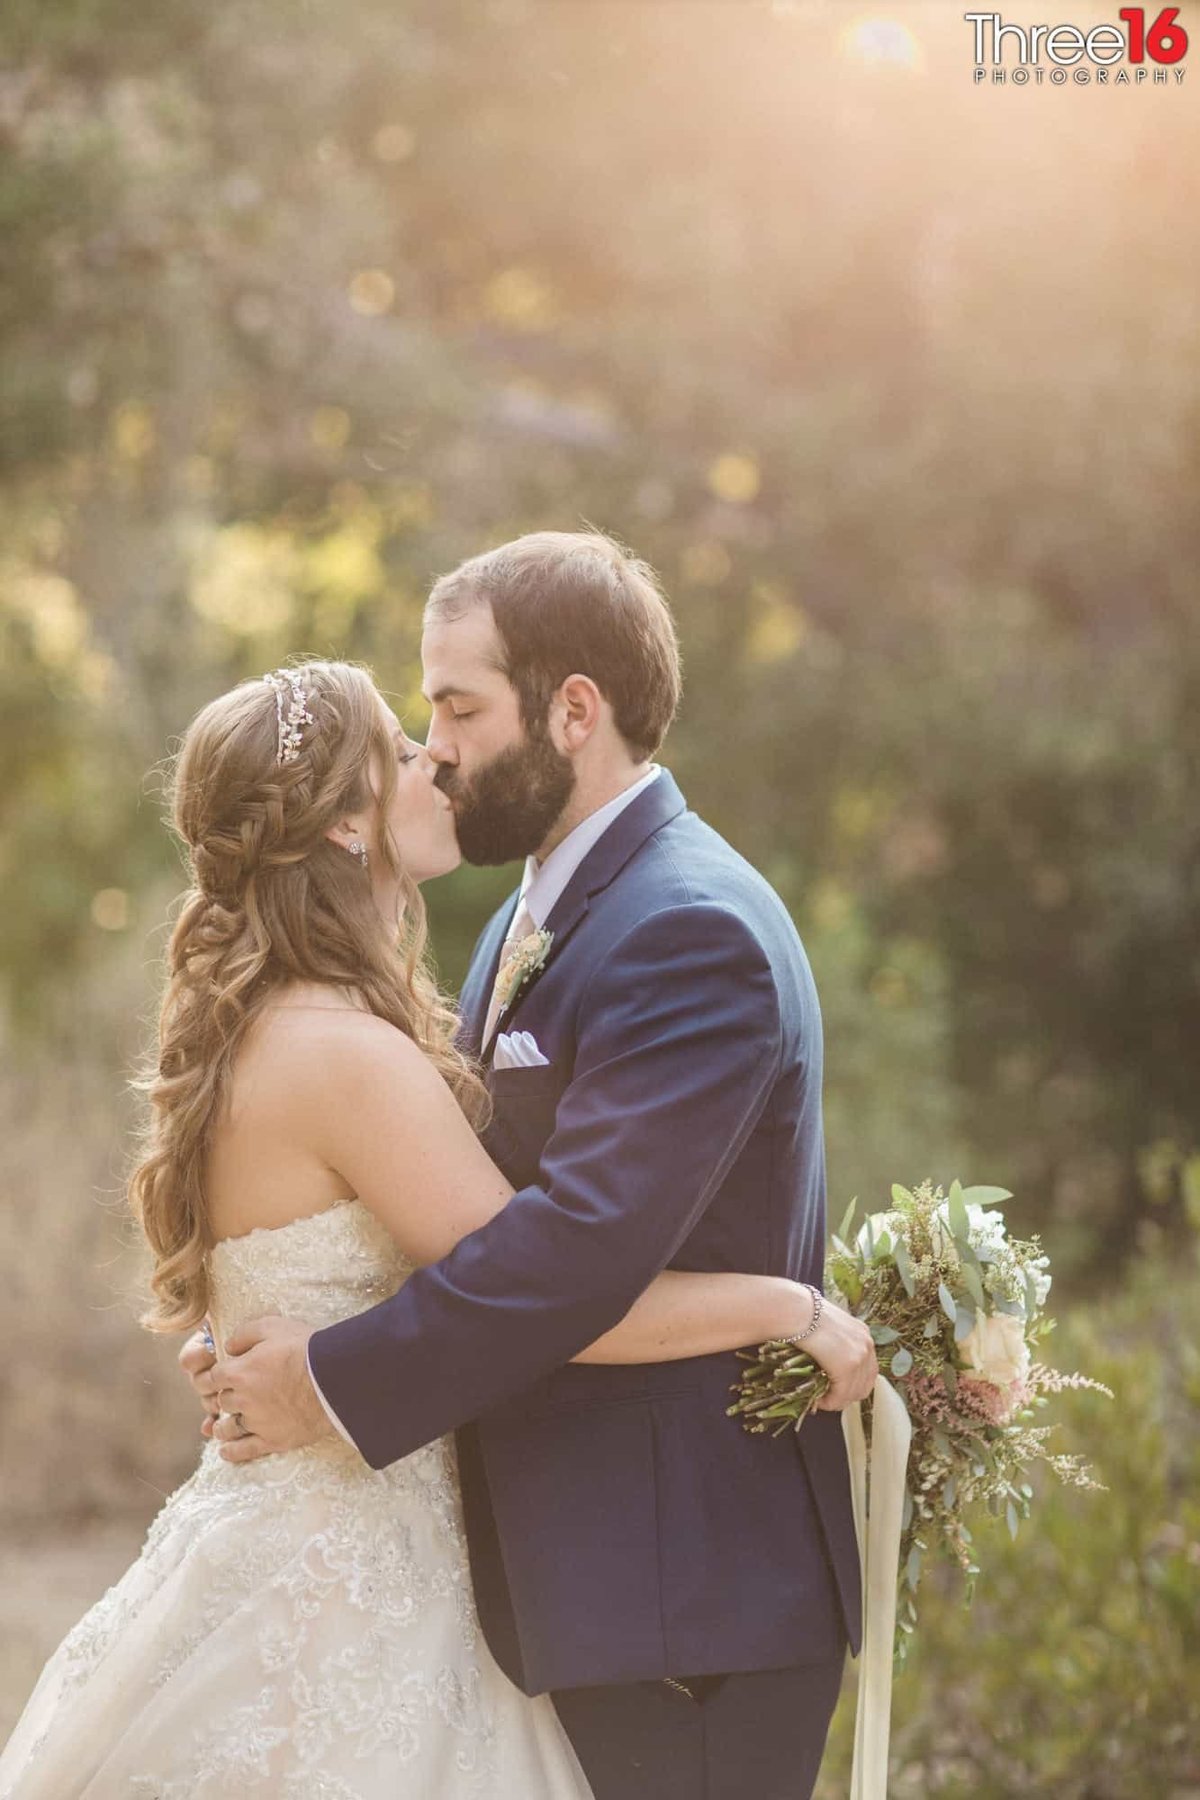 Bride and Groom share a kiss during their moment alone